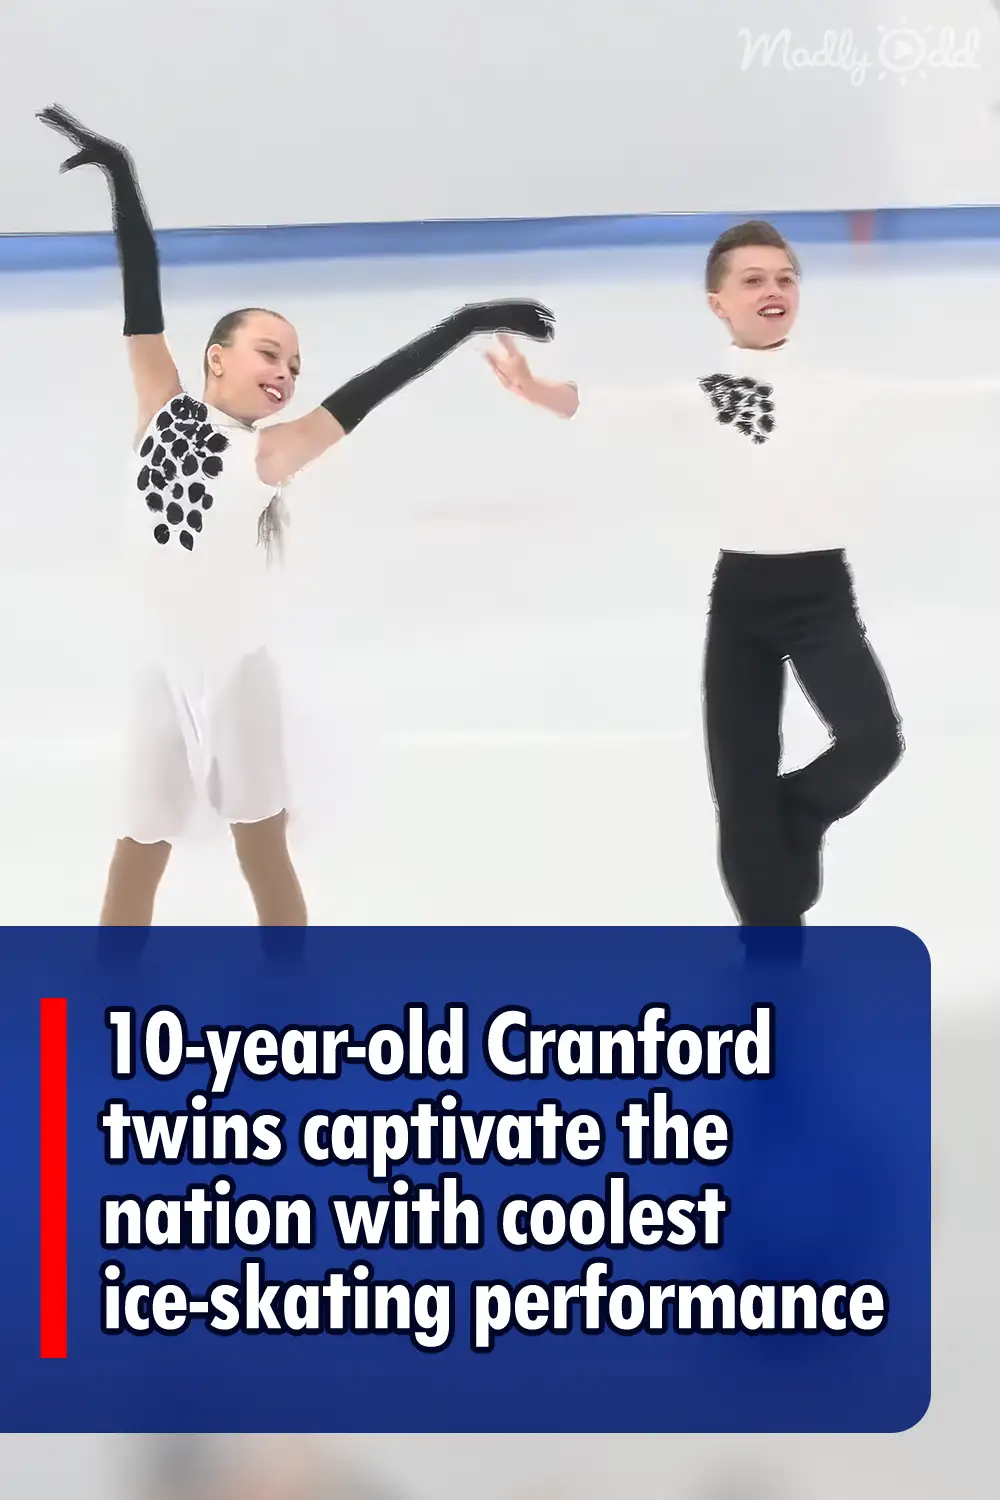 10-year-old Cranford twins captivate the nation with coolest ice-skating performance